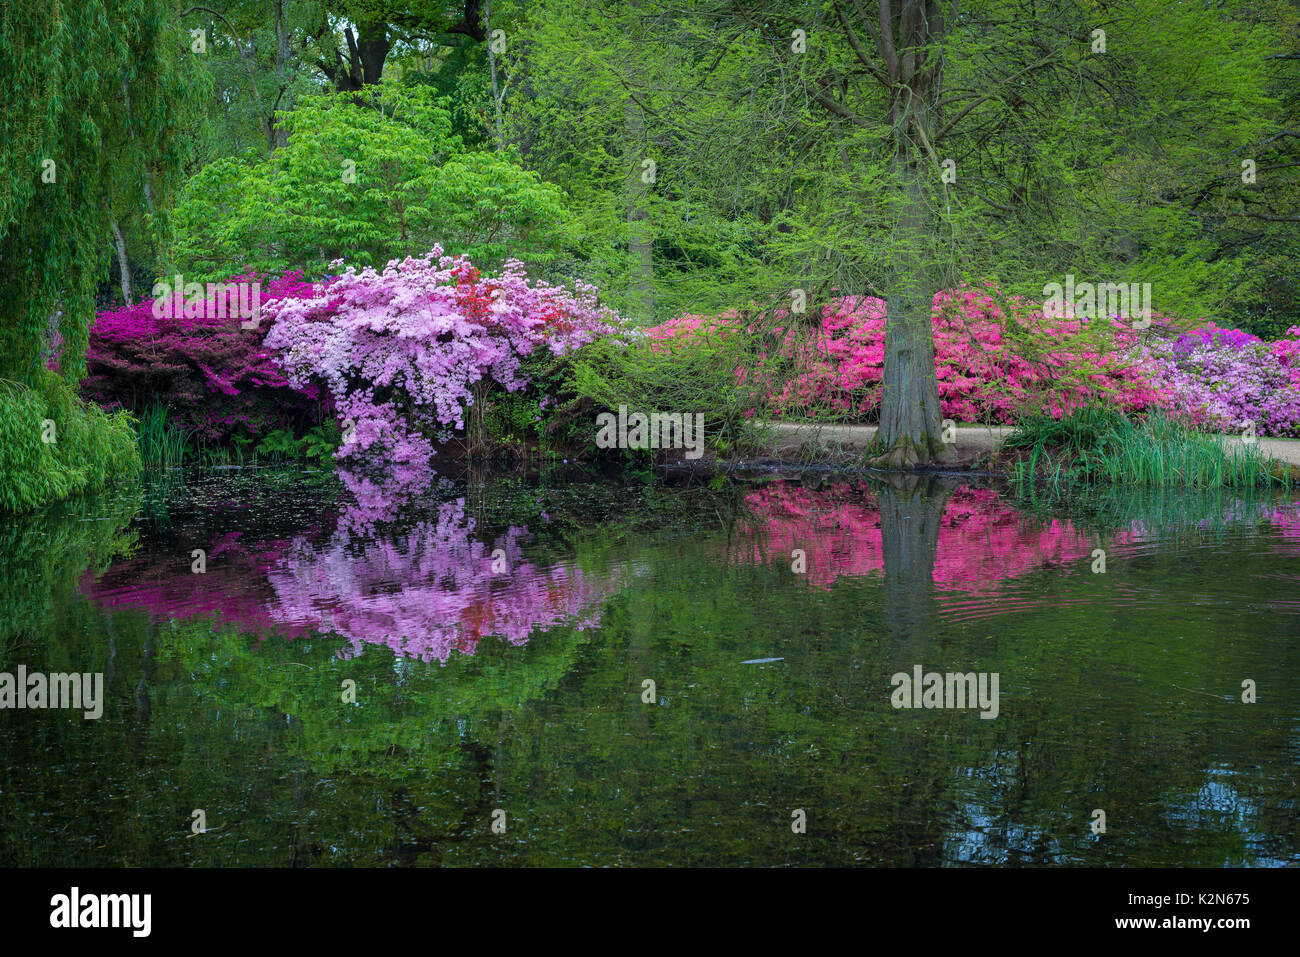 Rhododendron trees in the Isabella Plantation in Richmond Park, London, United Kingdom Stock Photo